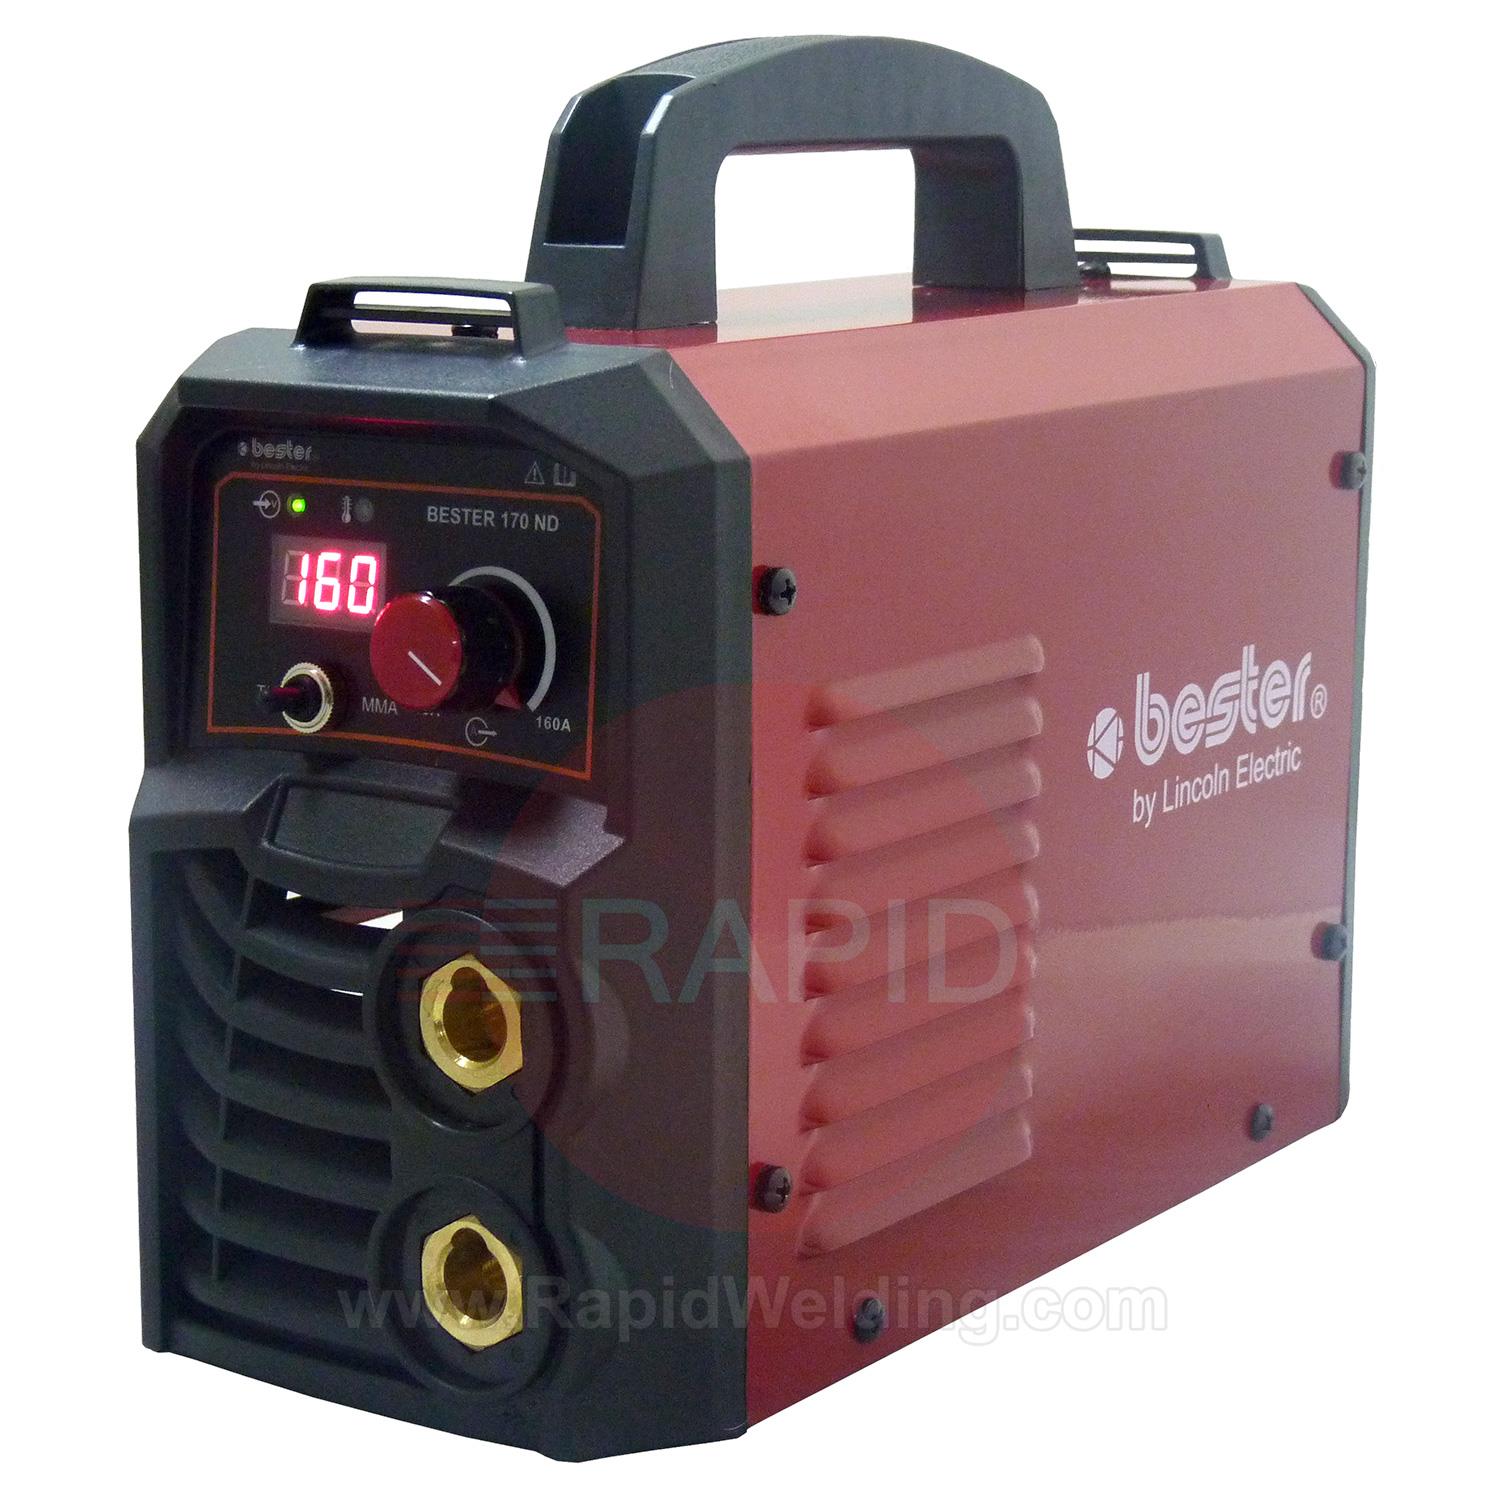 B18257-1-TP  Lincoln Bester 170-ND Inverter Arc Welder Suitcase Package, with TIG Torch & Accessory Kit - 230v